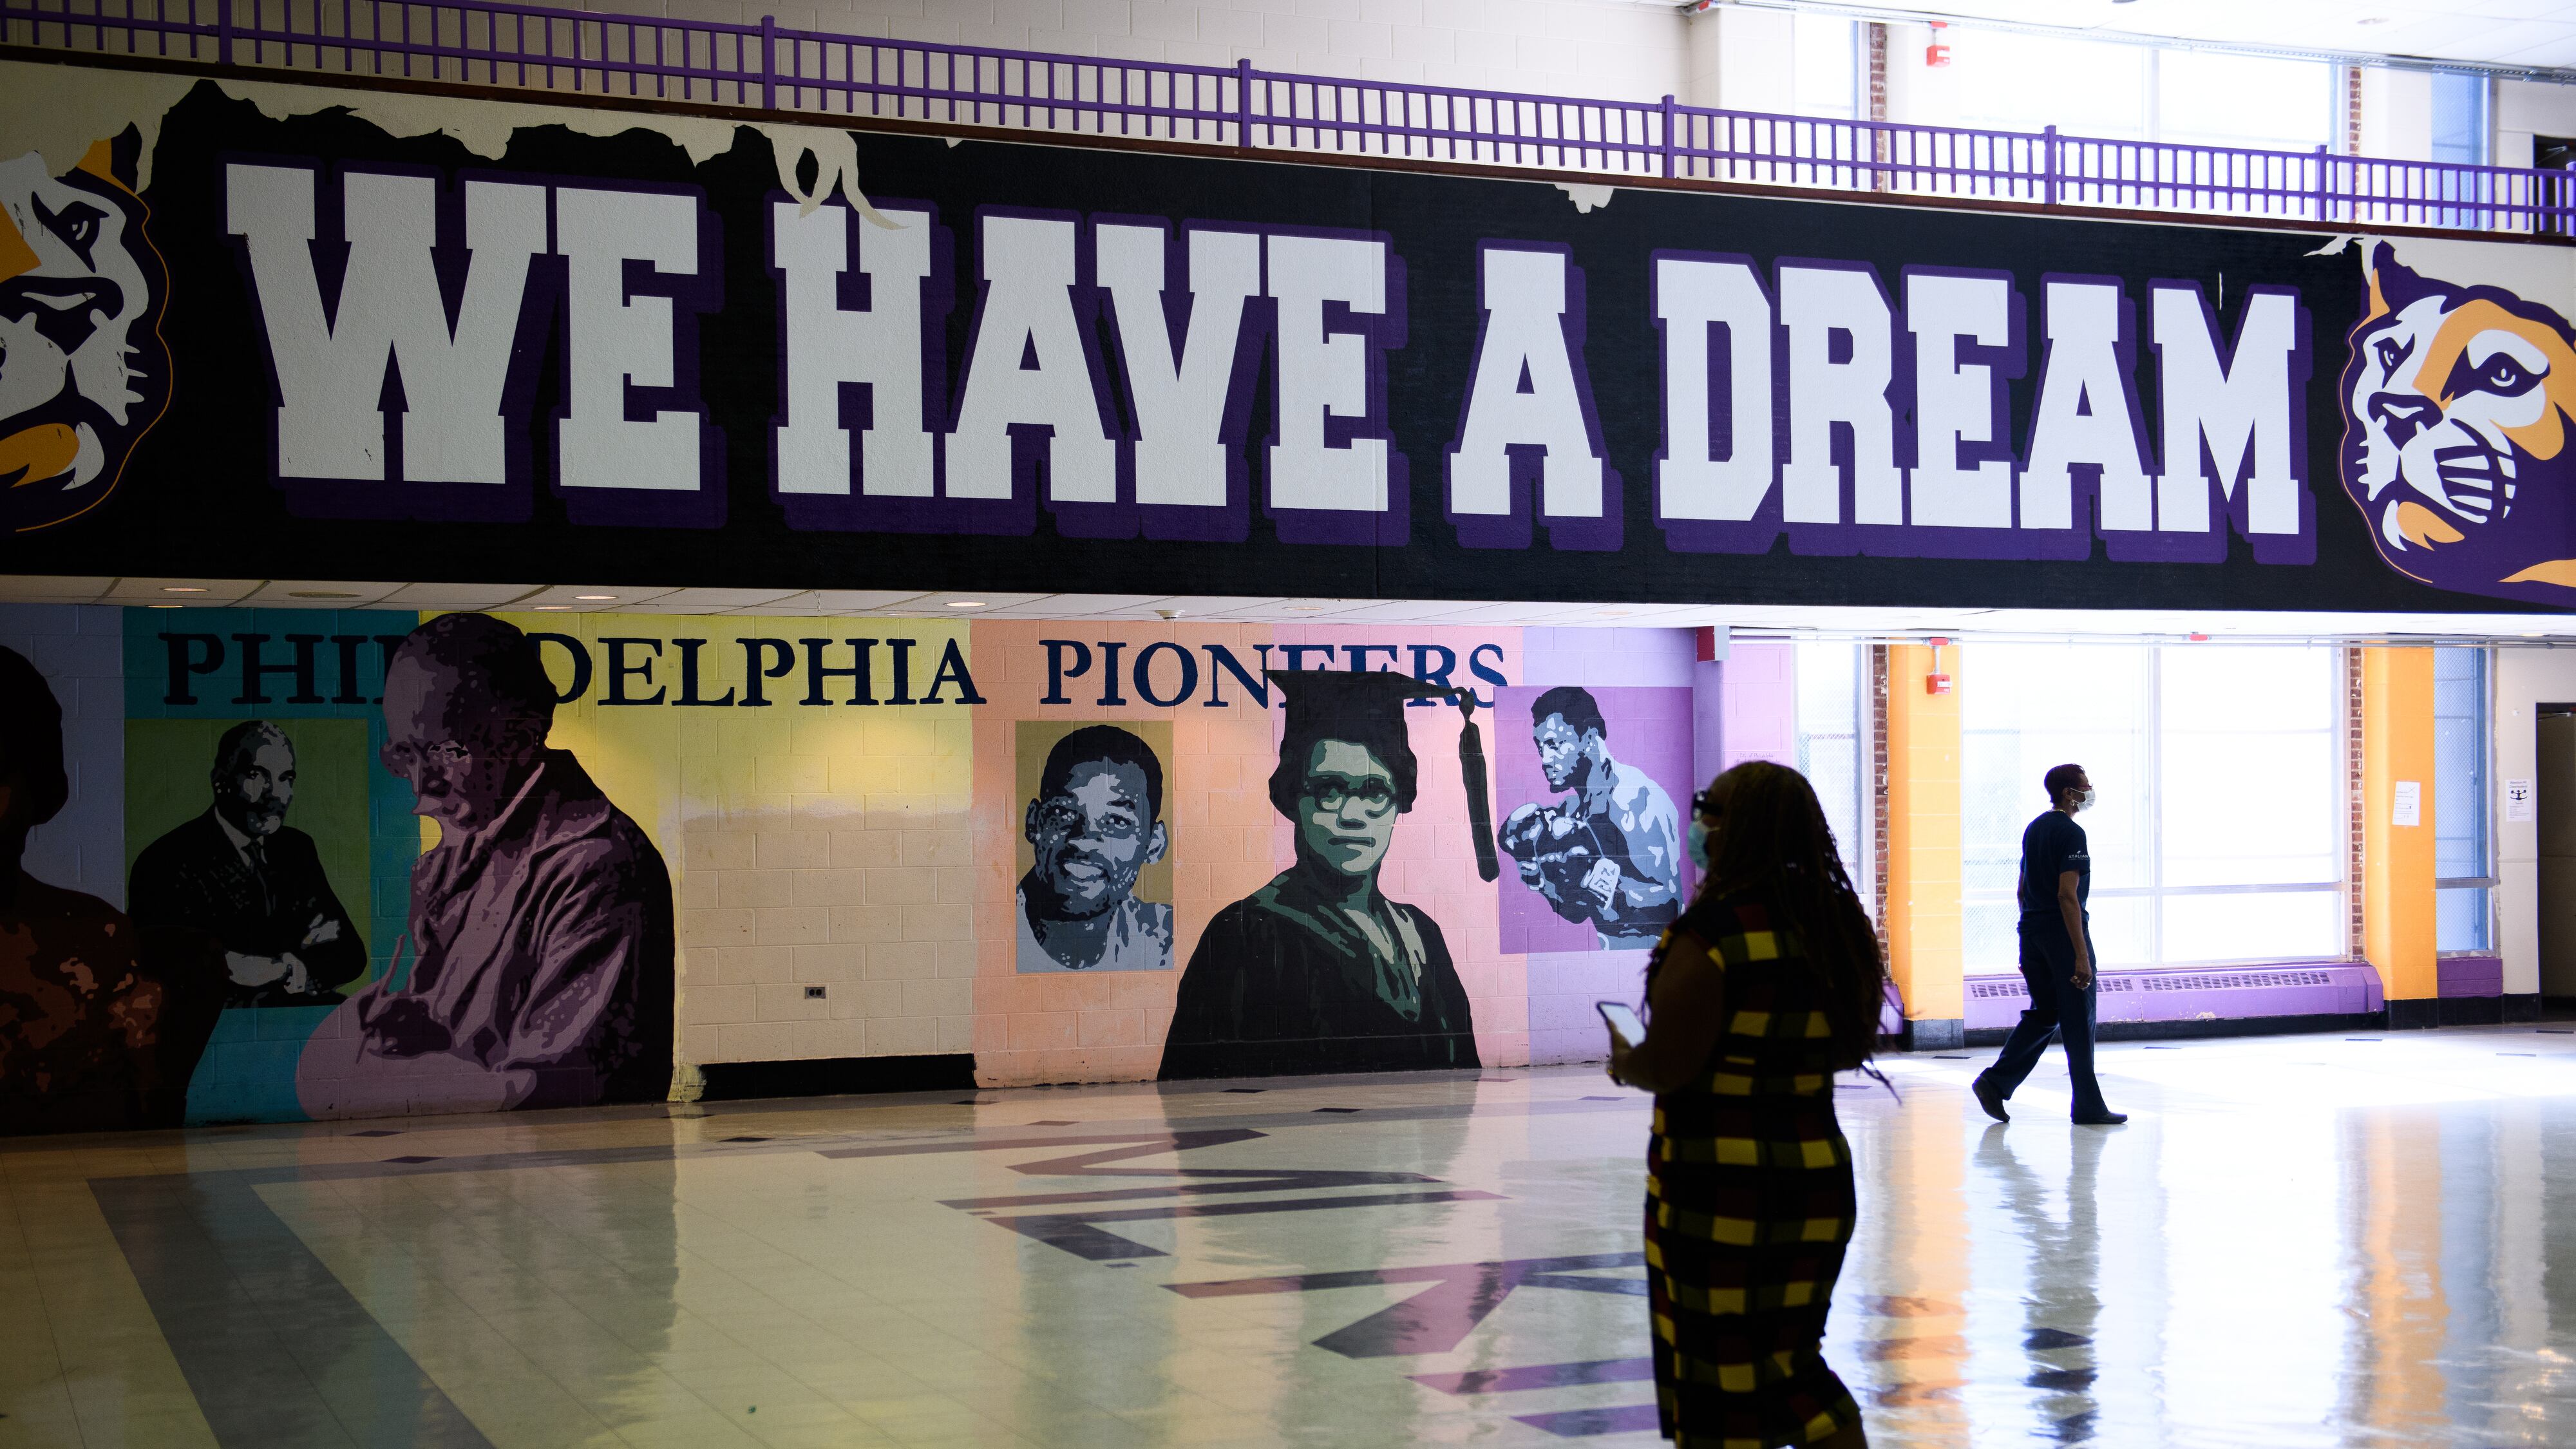 A school official walks in front of a sign in a cavernous hall that reads “We Have a Dream.”